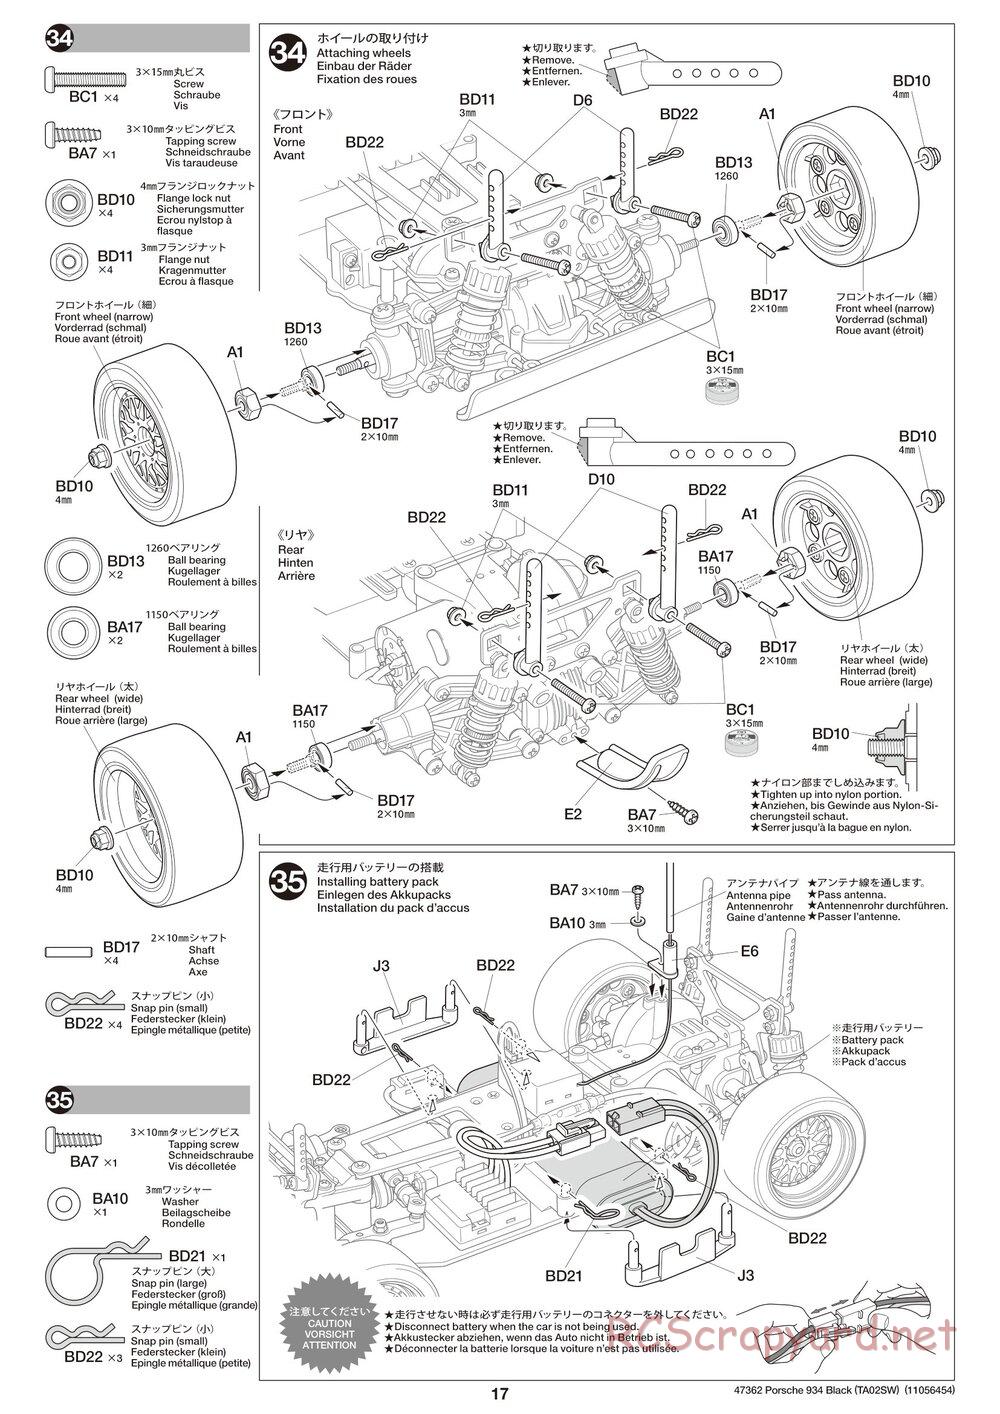 Tamiya - TT-02 White Special Chassis - Manual - Page 17